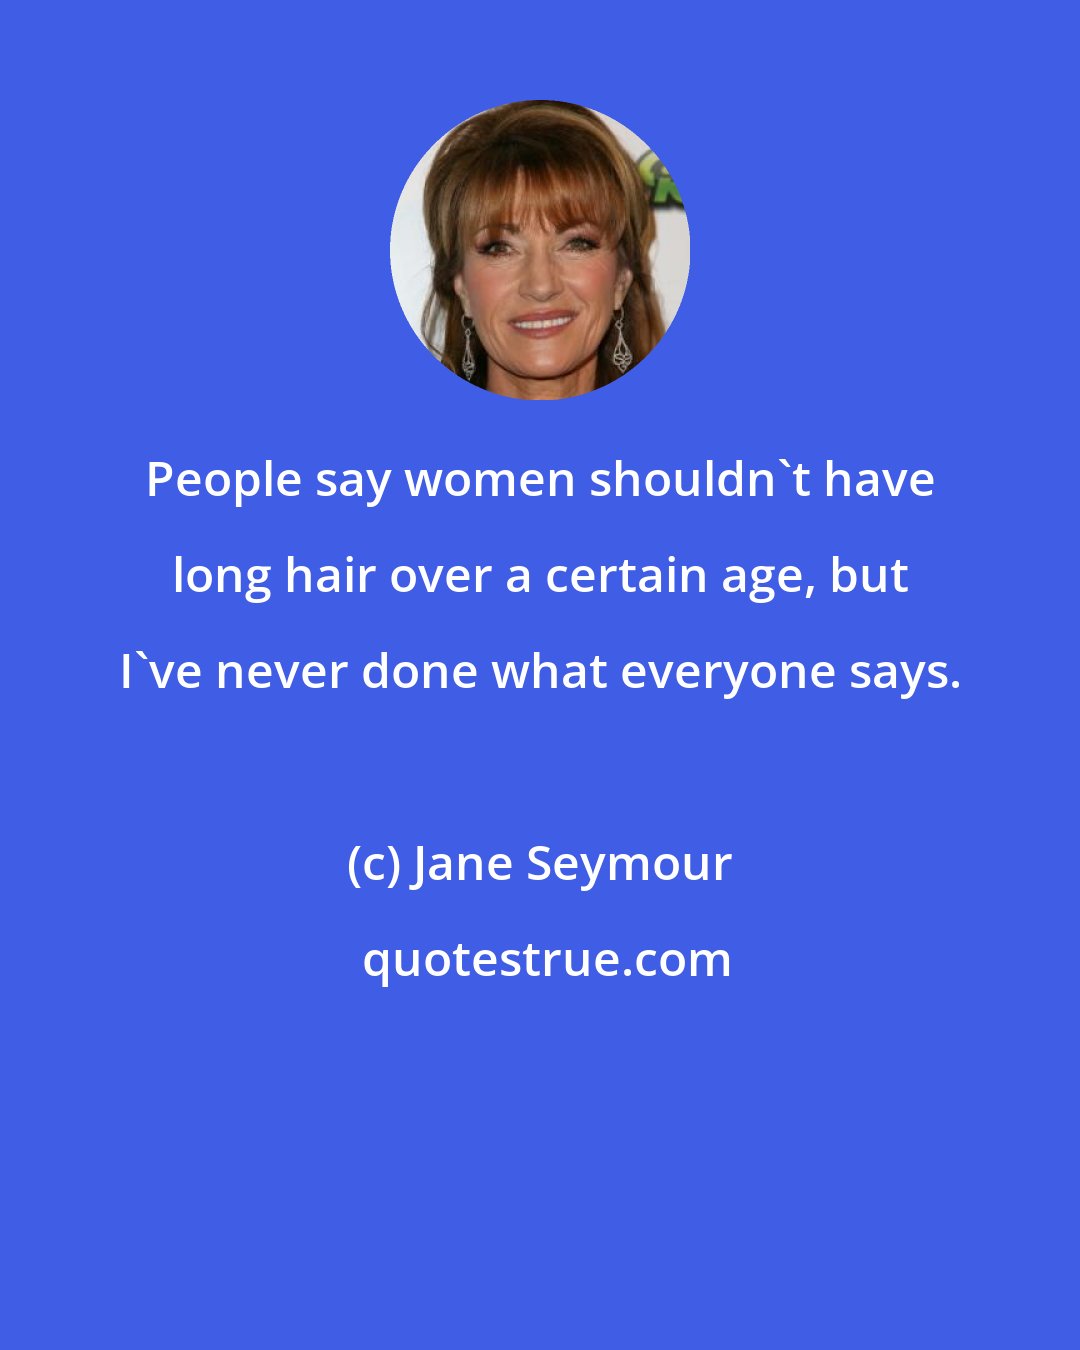 Jane Seymour: People say women shouldn't have long hair over a certain age, but I've never done what everyone says.